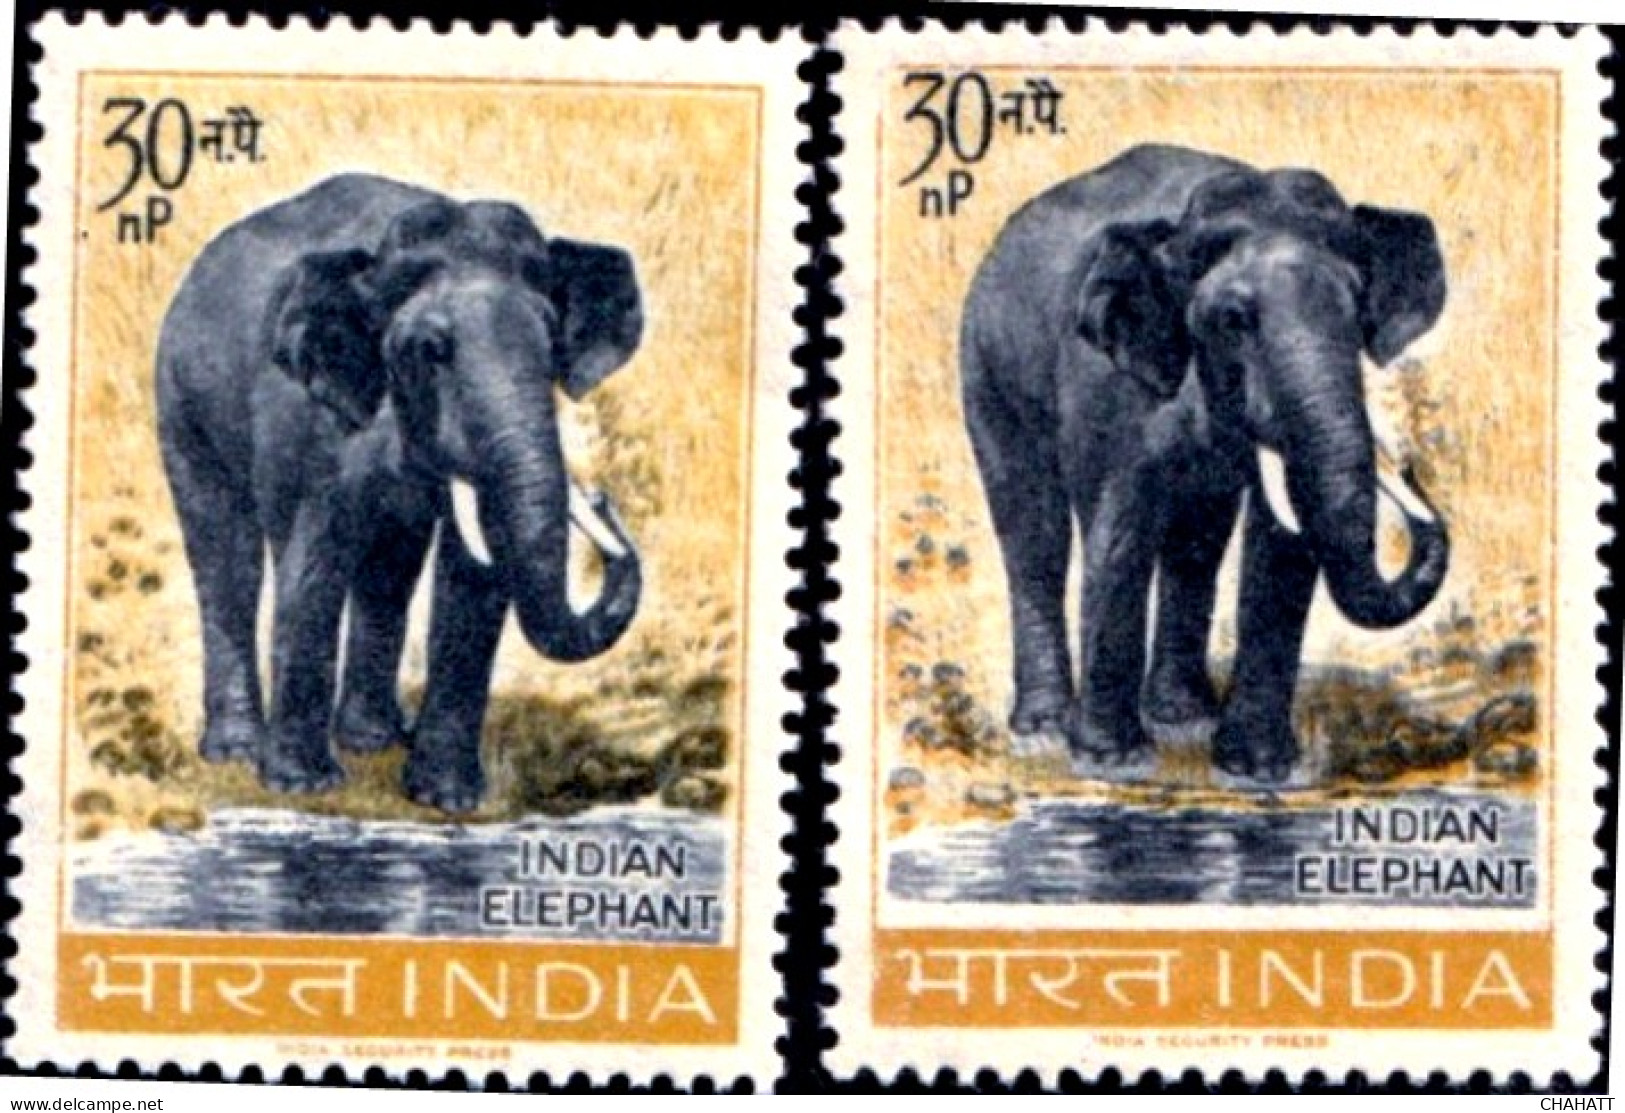 INDIAN ELEPHANT- 30np-WATERMARKED- INDIA 1963- COLOR VARIETY -MNH-IE-92 - Errors, Freaks & Oddities (EFO)